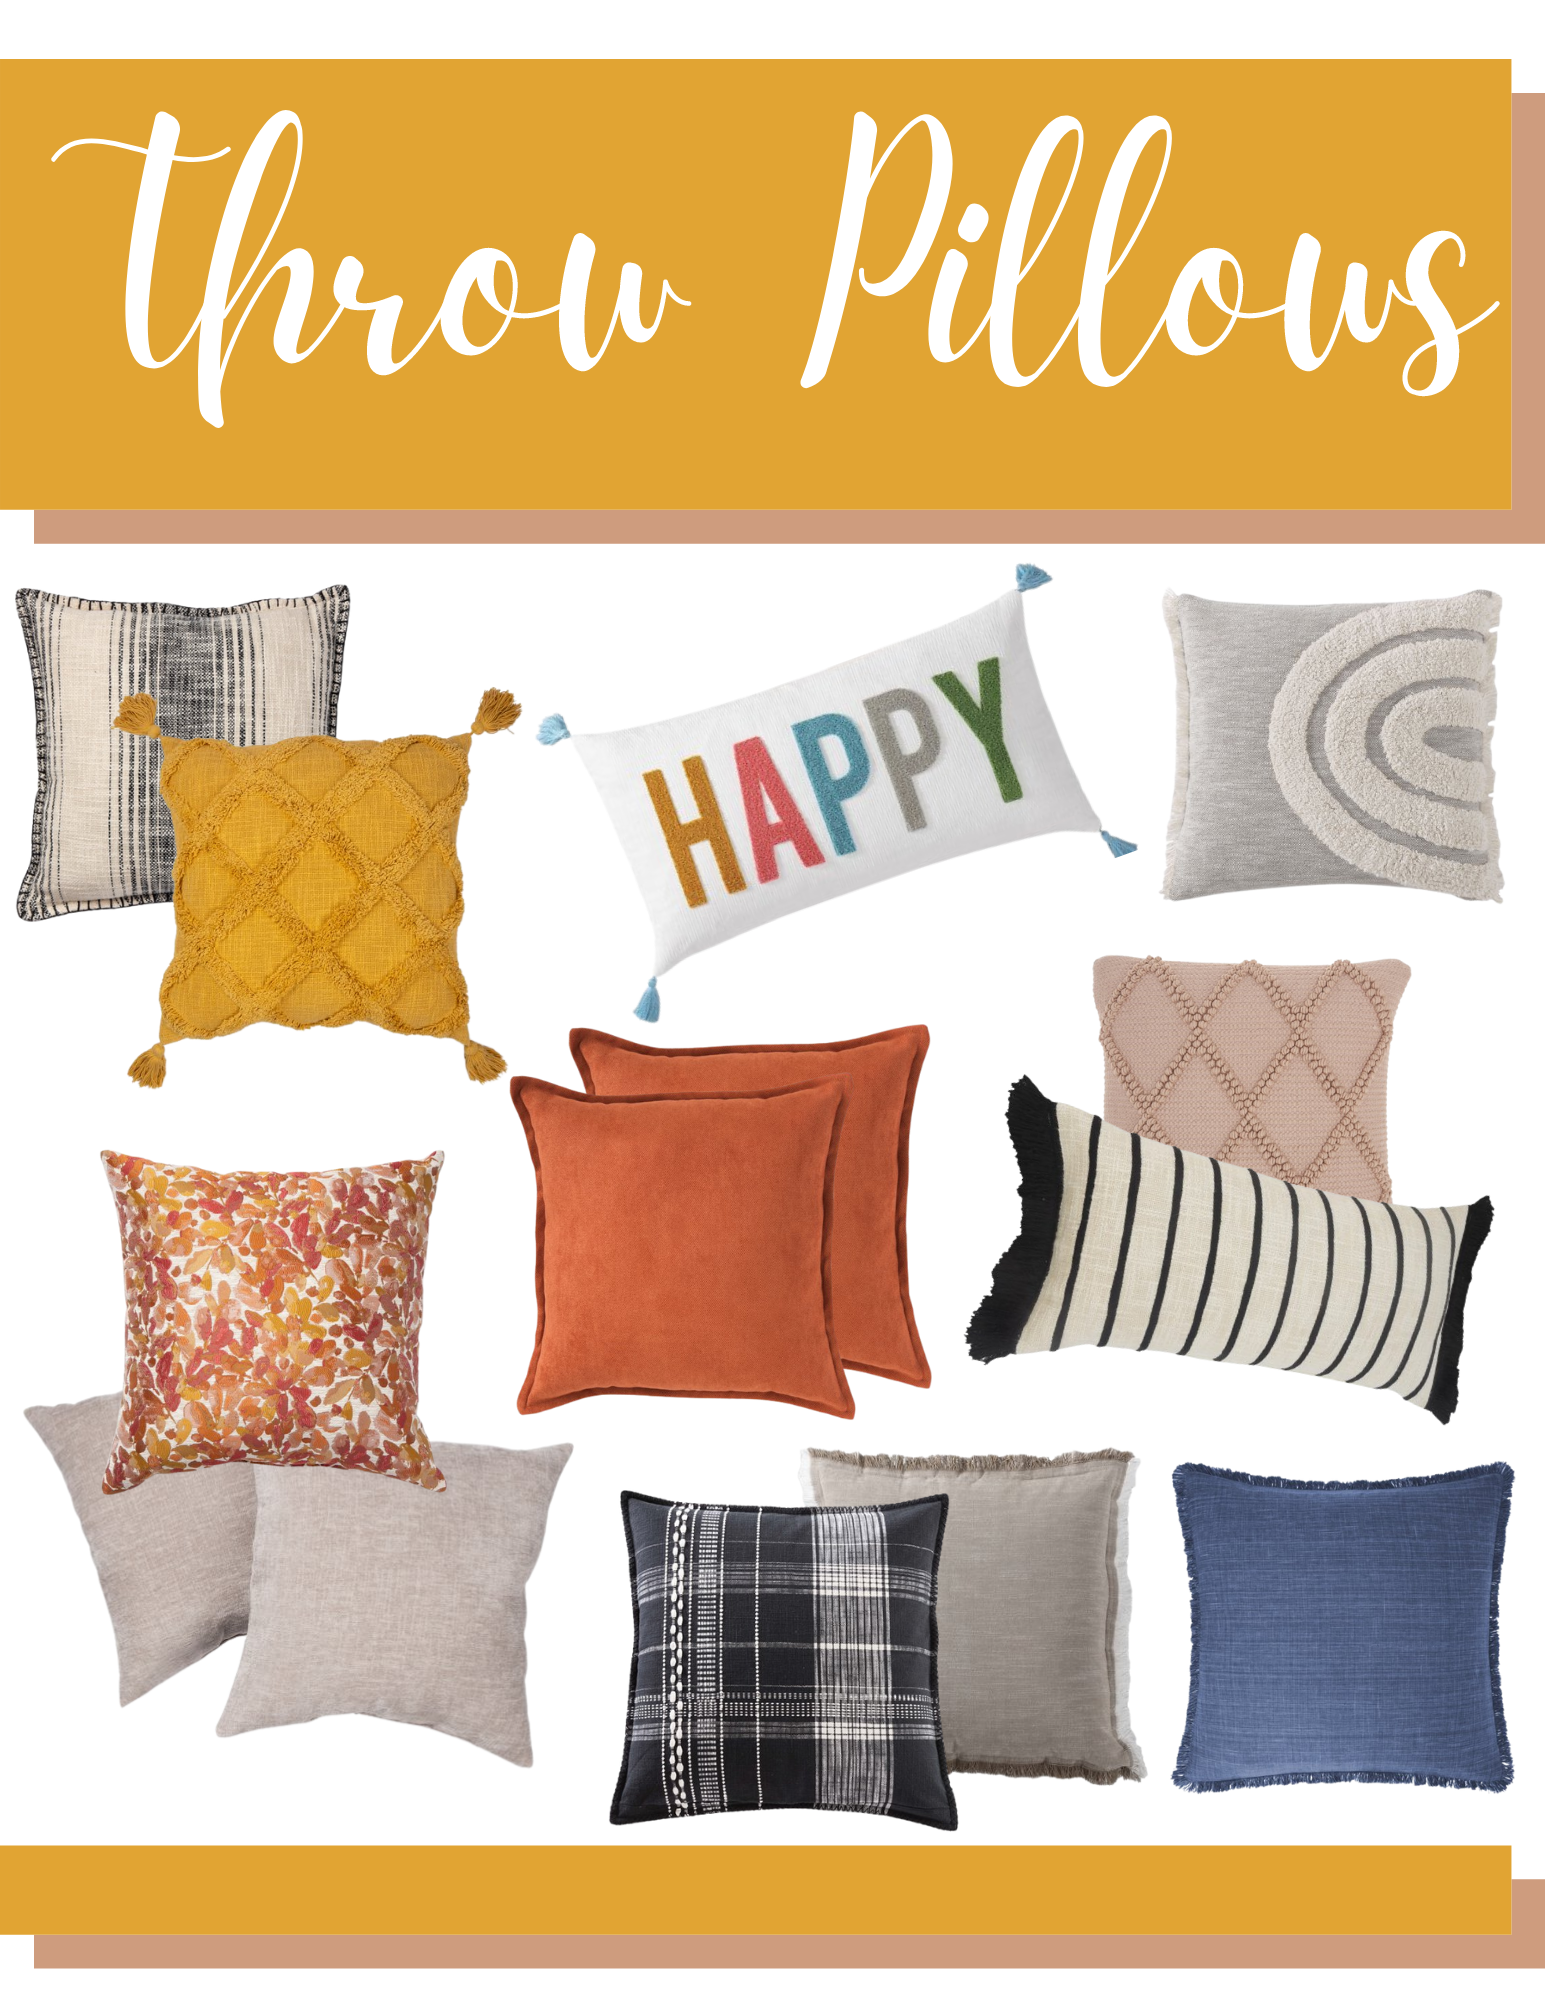 Where to Buy Throw Pillows for Under $20